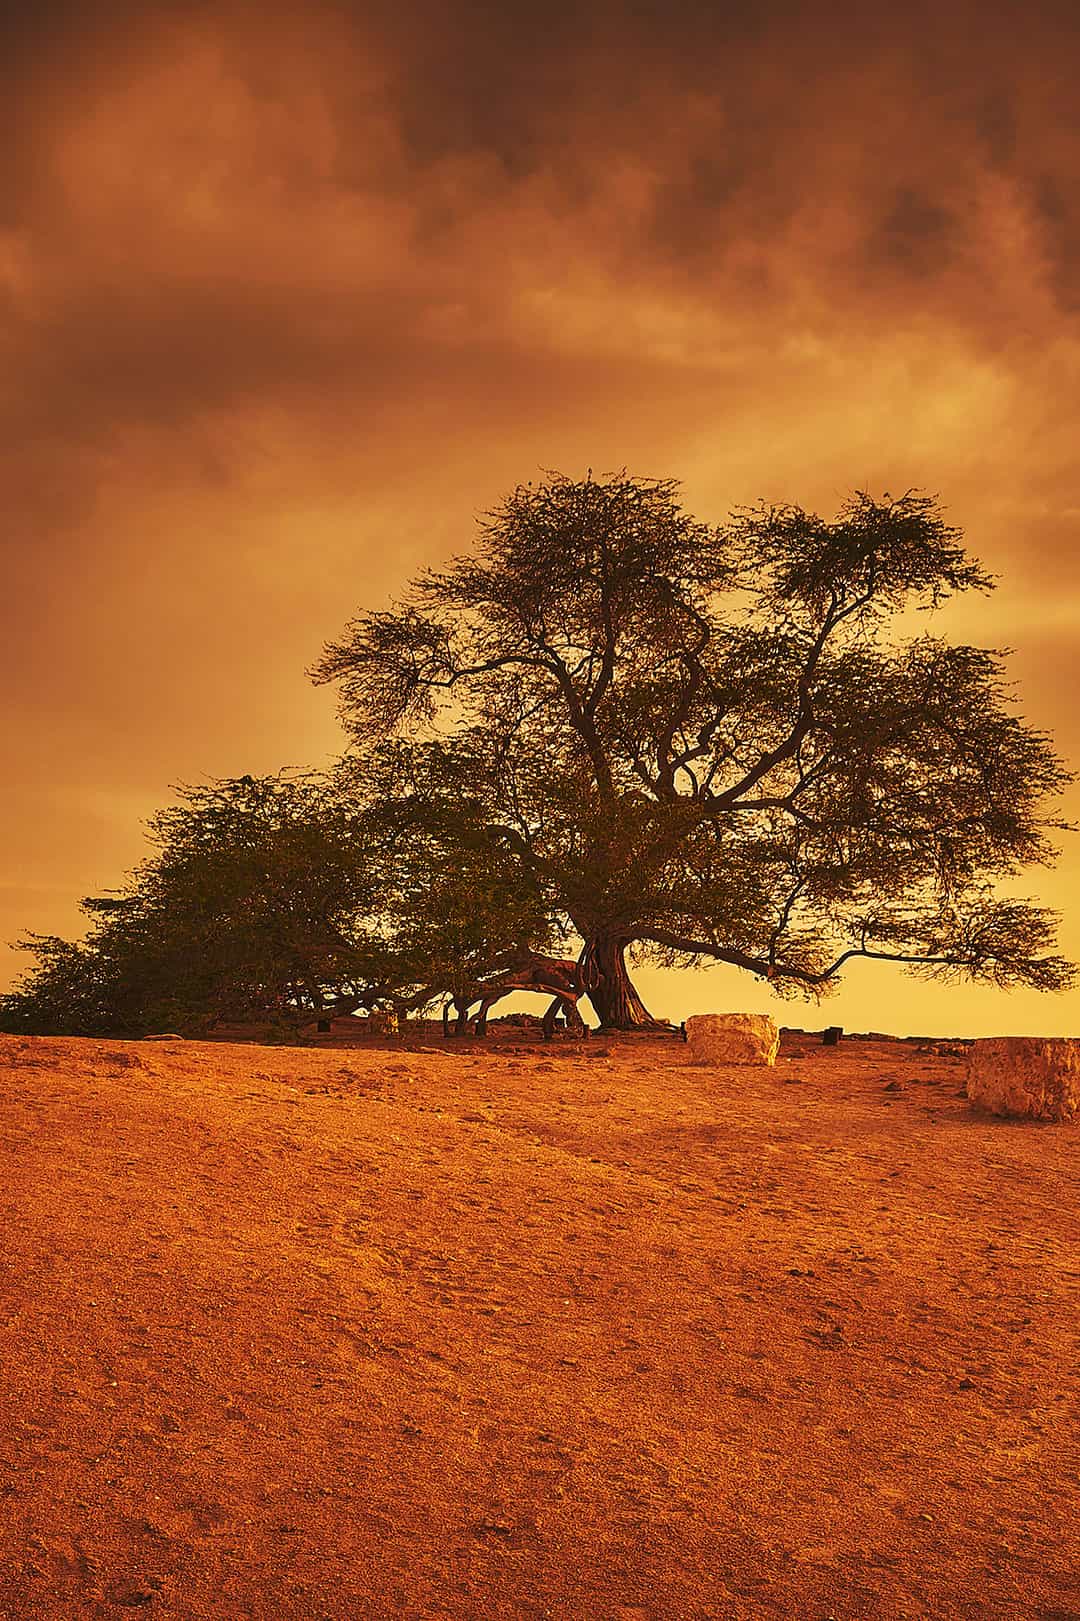 The Tree of Life in Bahrain + 11 Fascinating and Unique Trees to Put On Your Bucket List